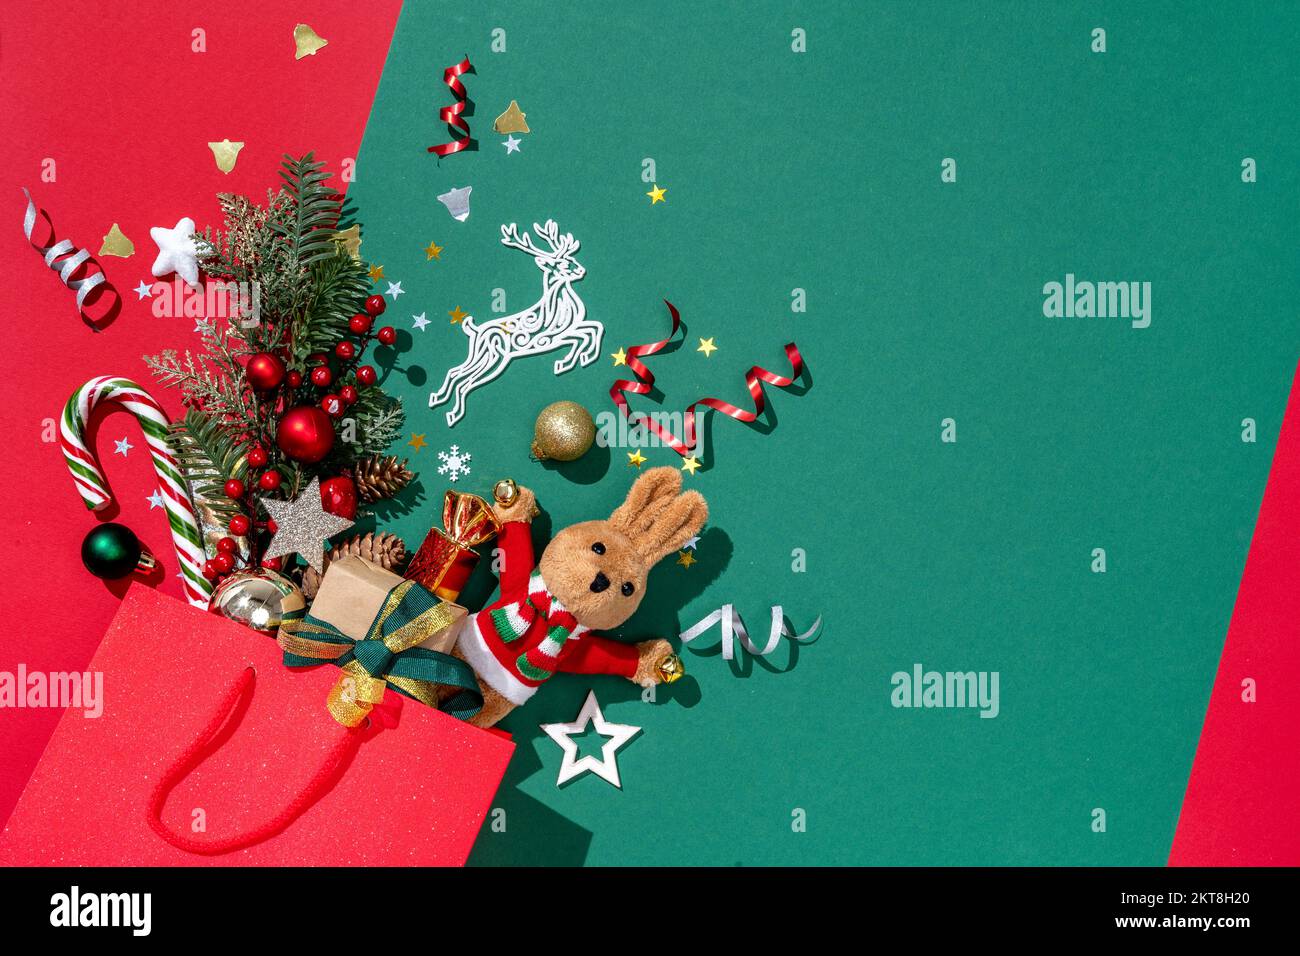 Holiday explosion from shopping bag on green background. Merry Christmas and Happy New Year concept Stock Photo